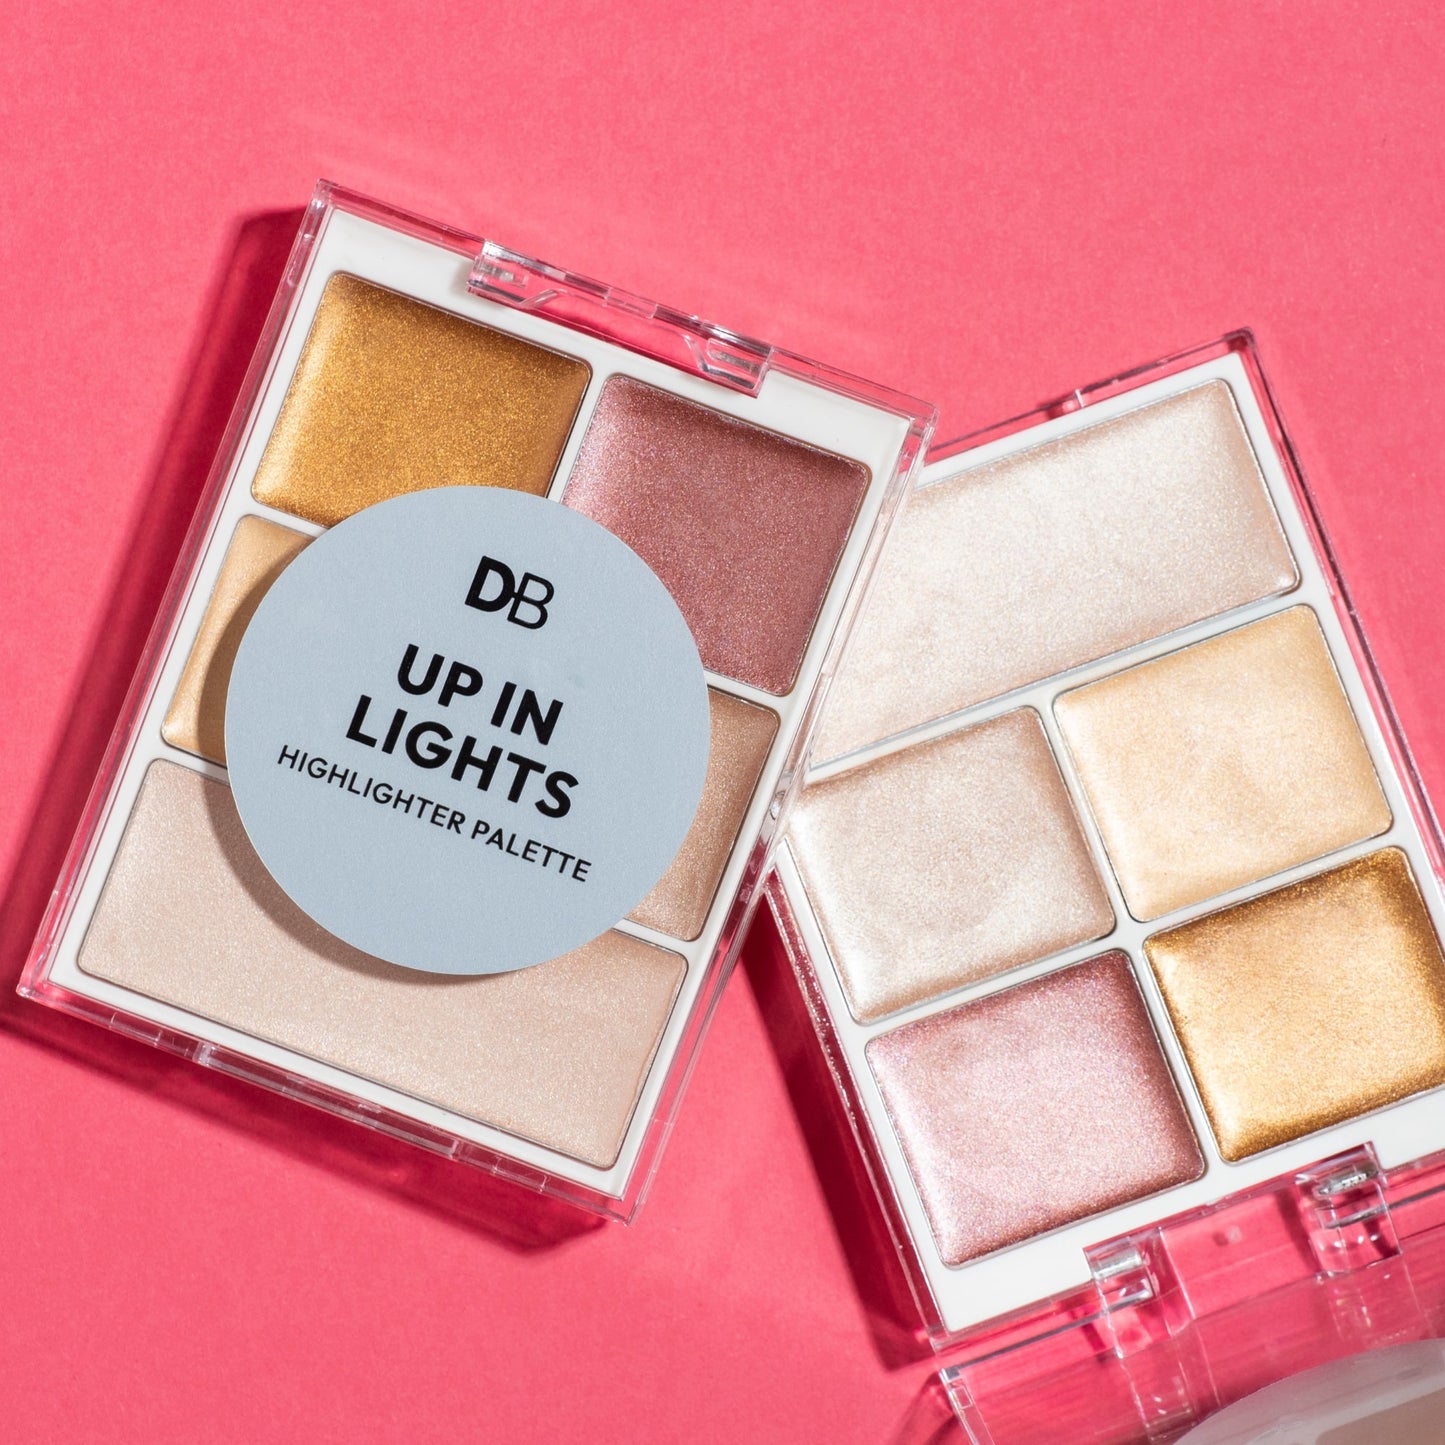 Up In Lights Highlighter Palette | DB Cosmetics | Lifestyle 01